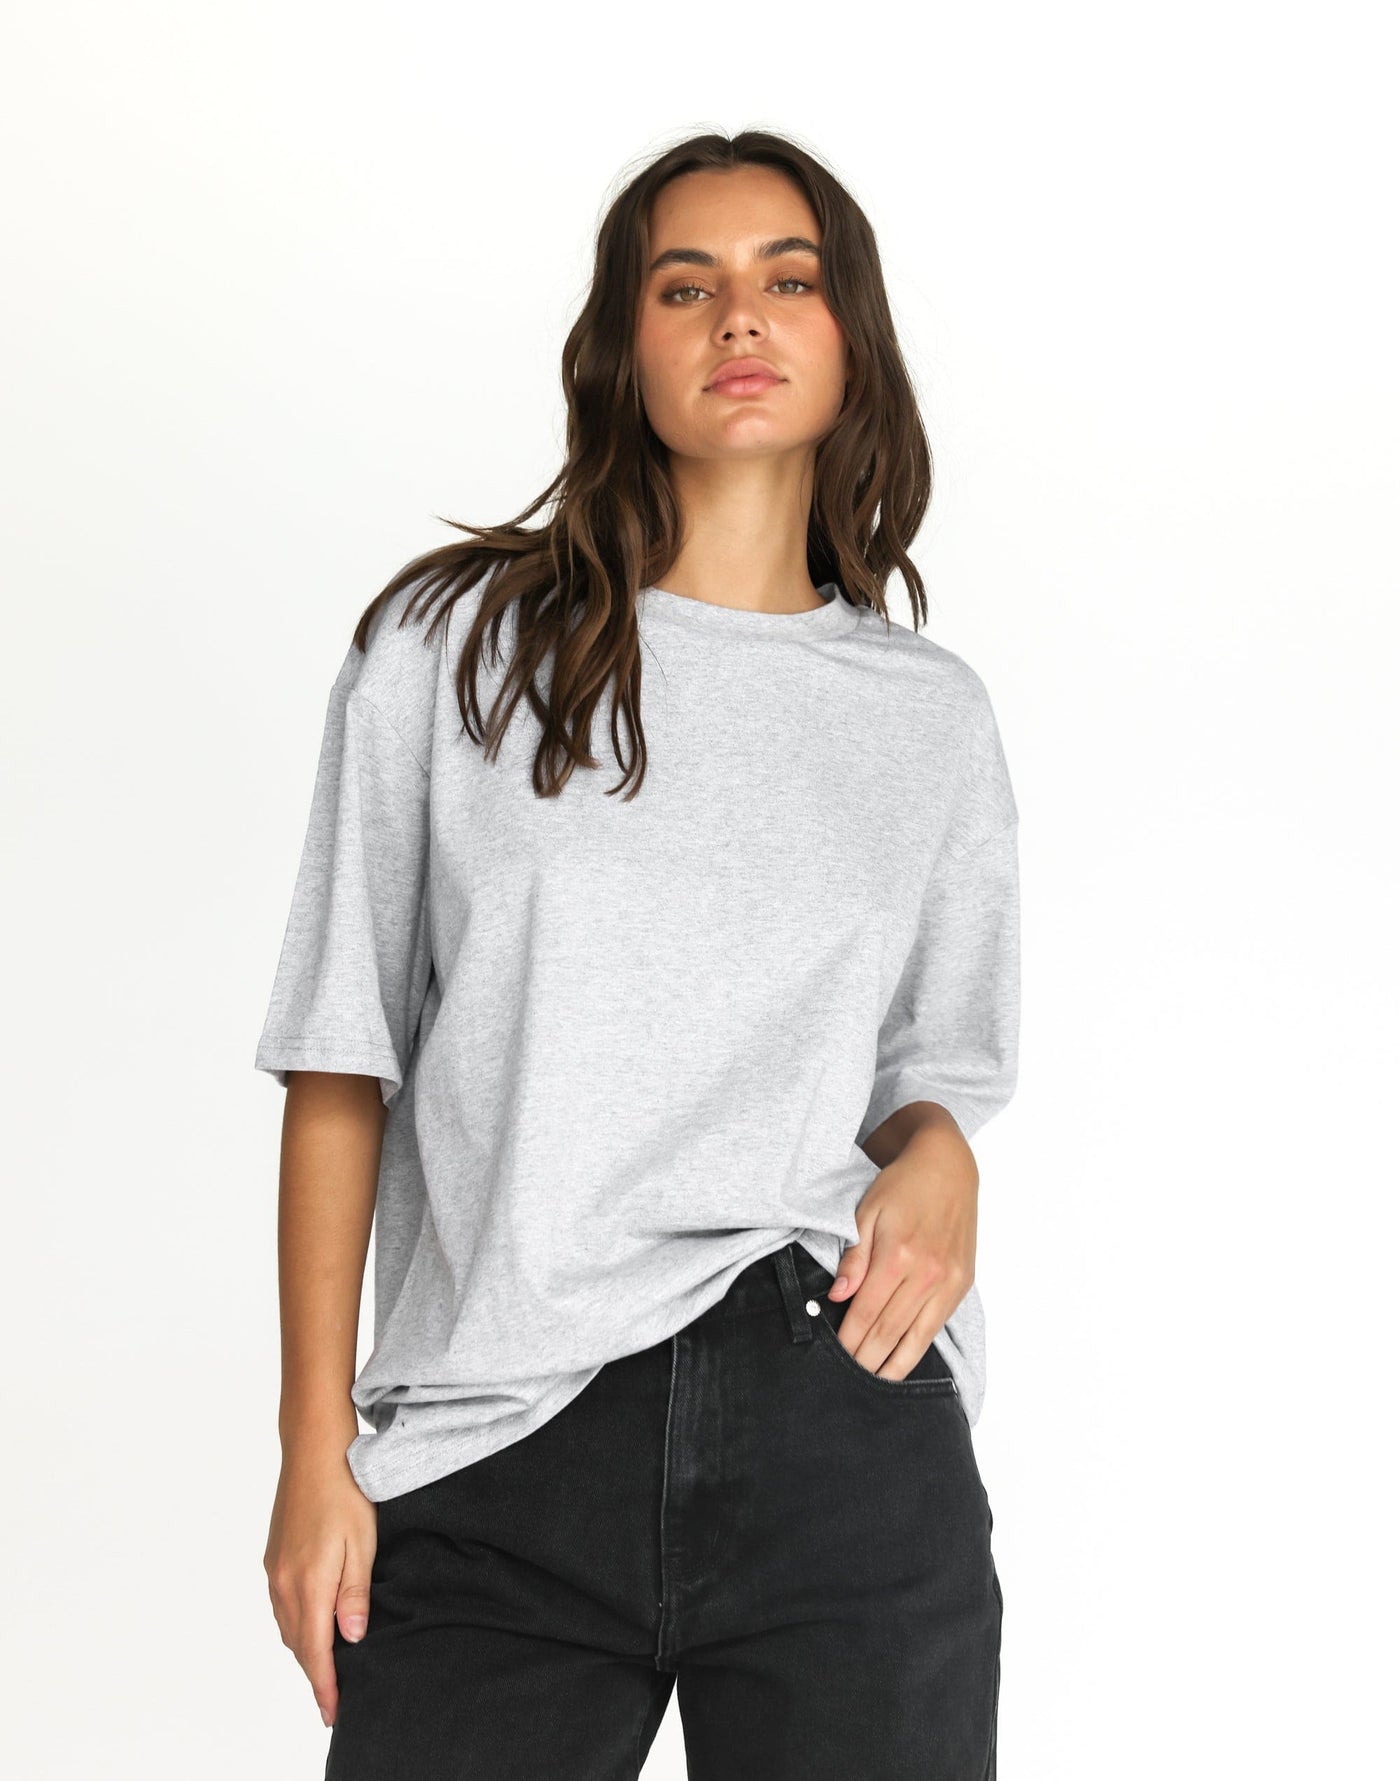 Luca Oversized Tee (Grey Marle) - Relaxed Oversized T-Shirt - Women's Top - Charcoal Clothing